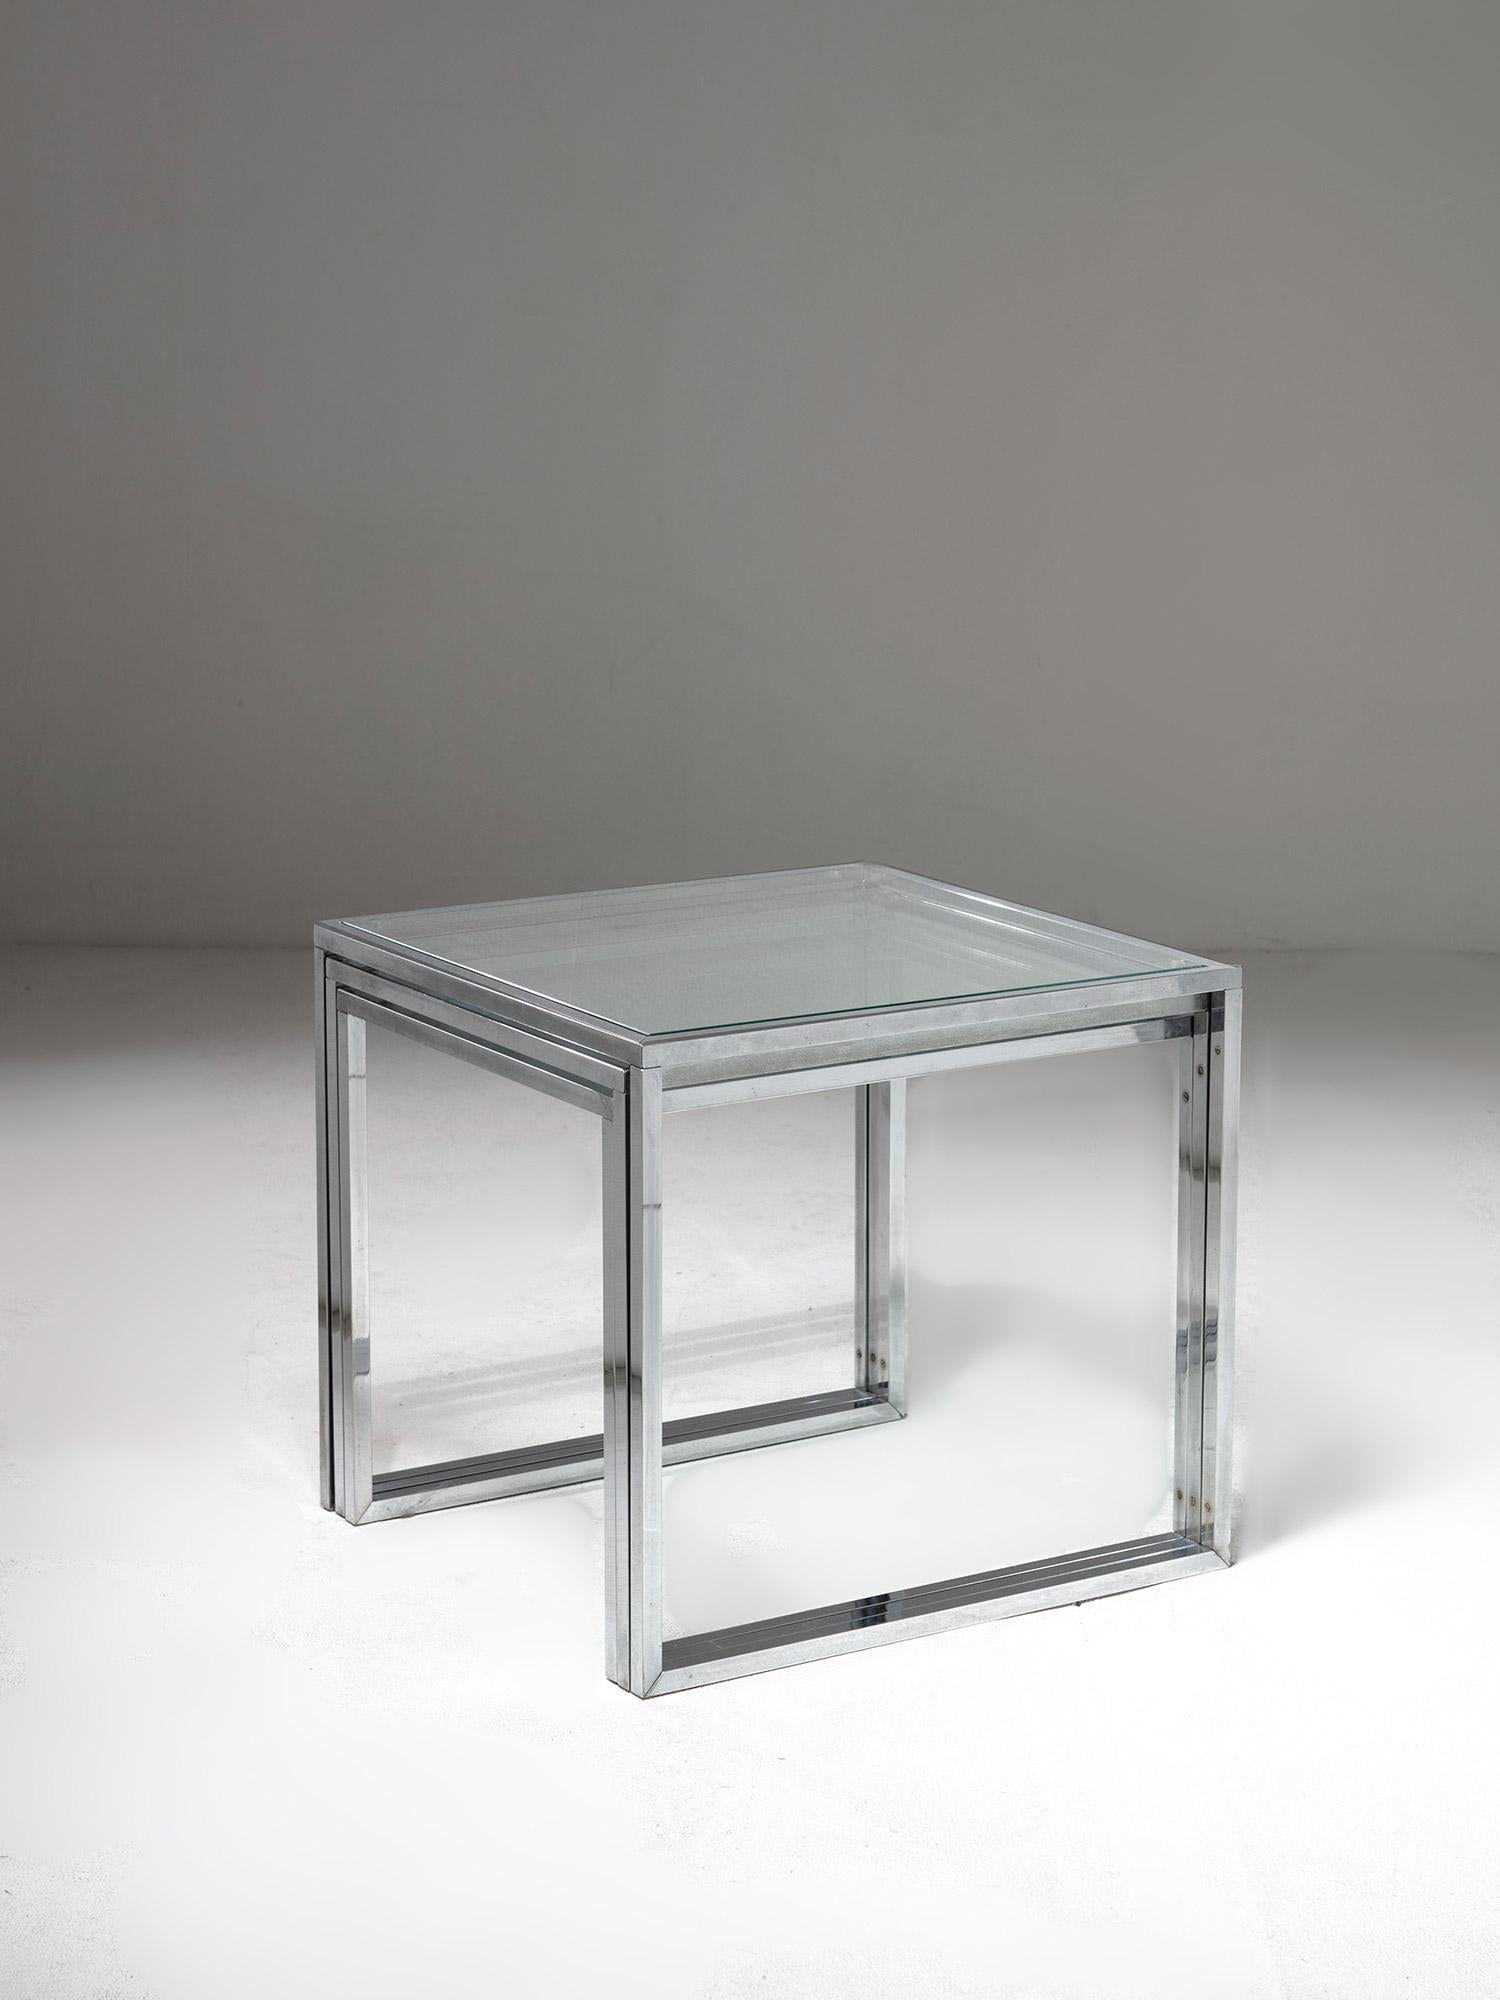 Italian Set of Three Steel and Glass Cubic Nesting Tables, Italy, 1970s For Sale